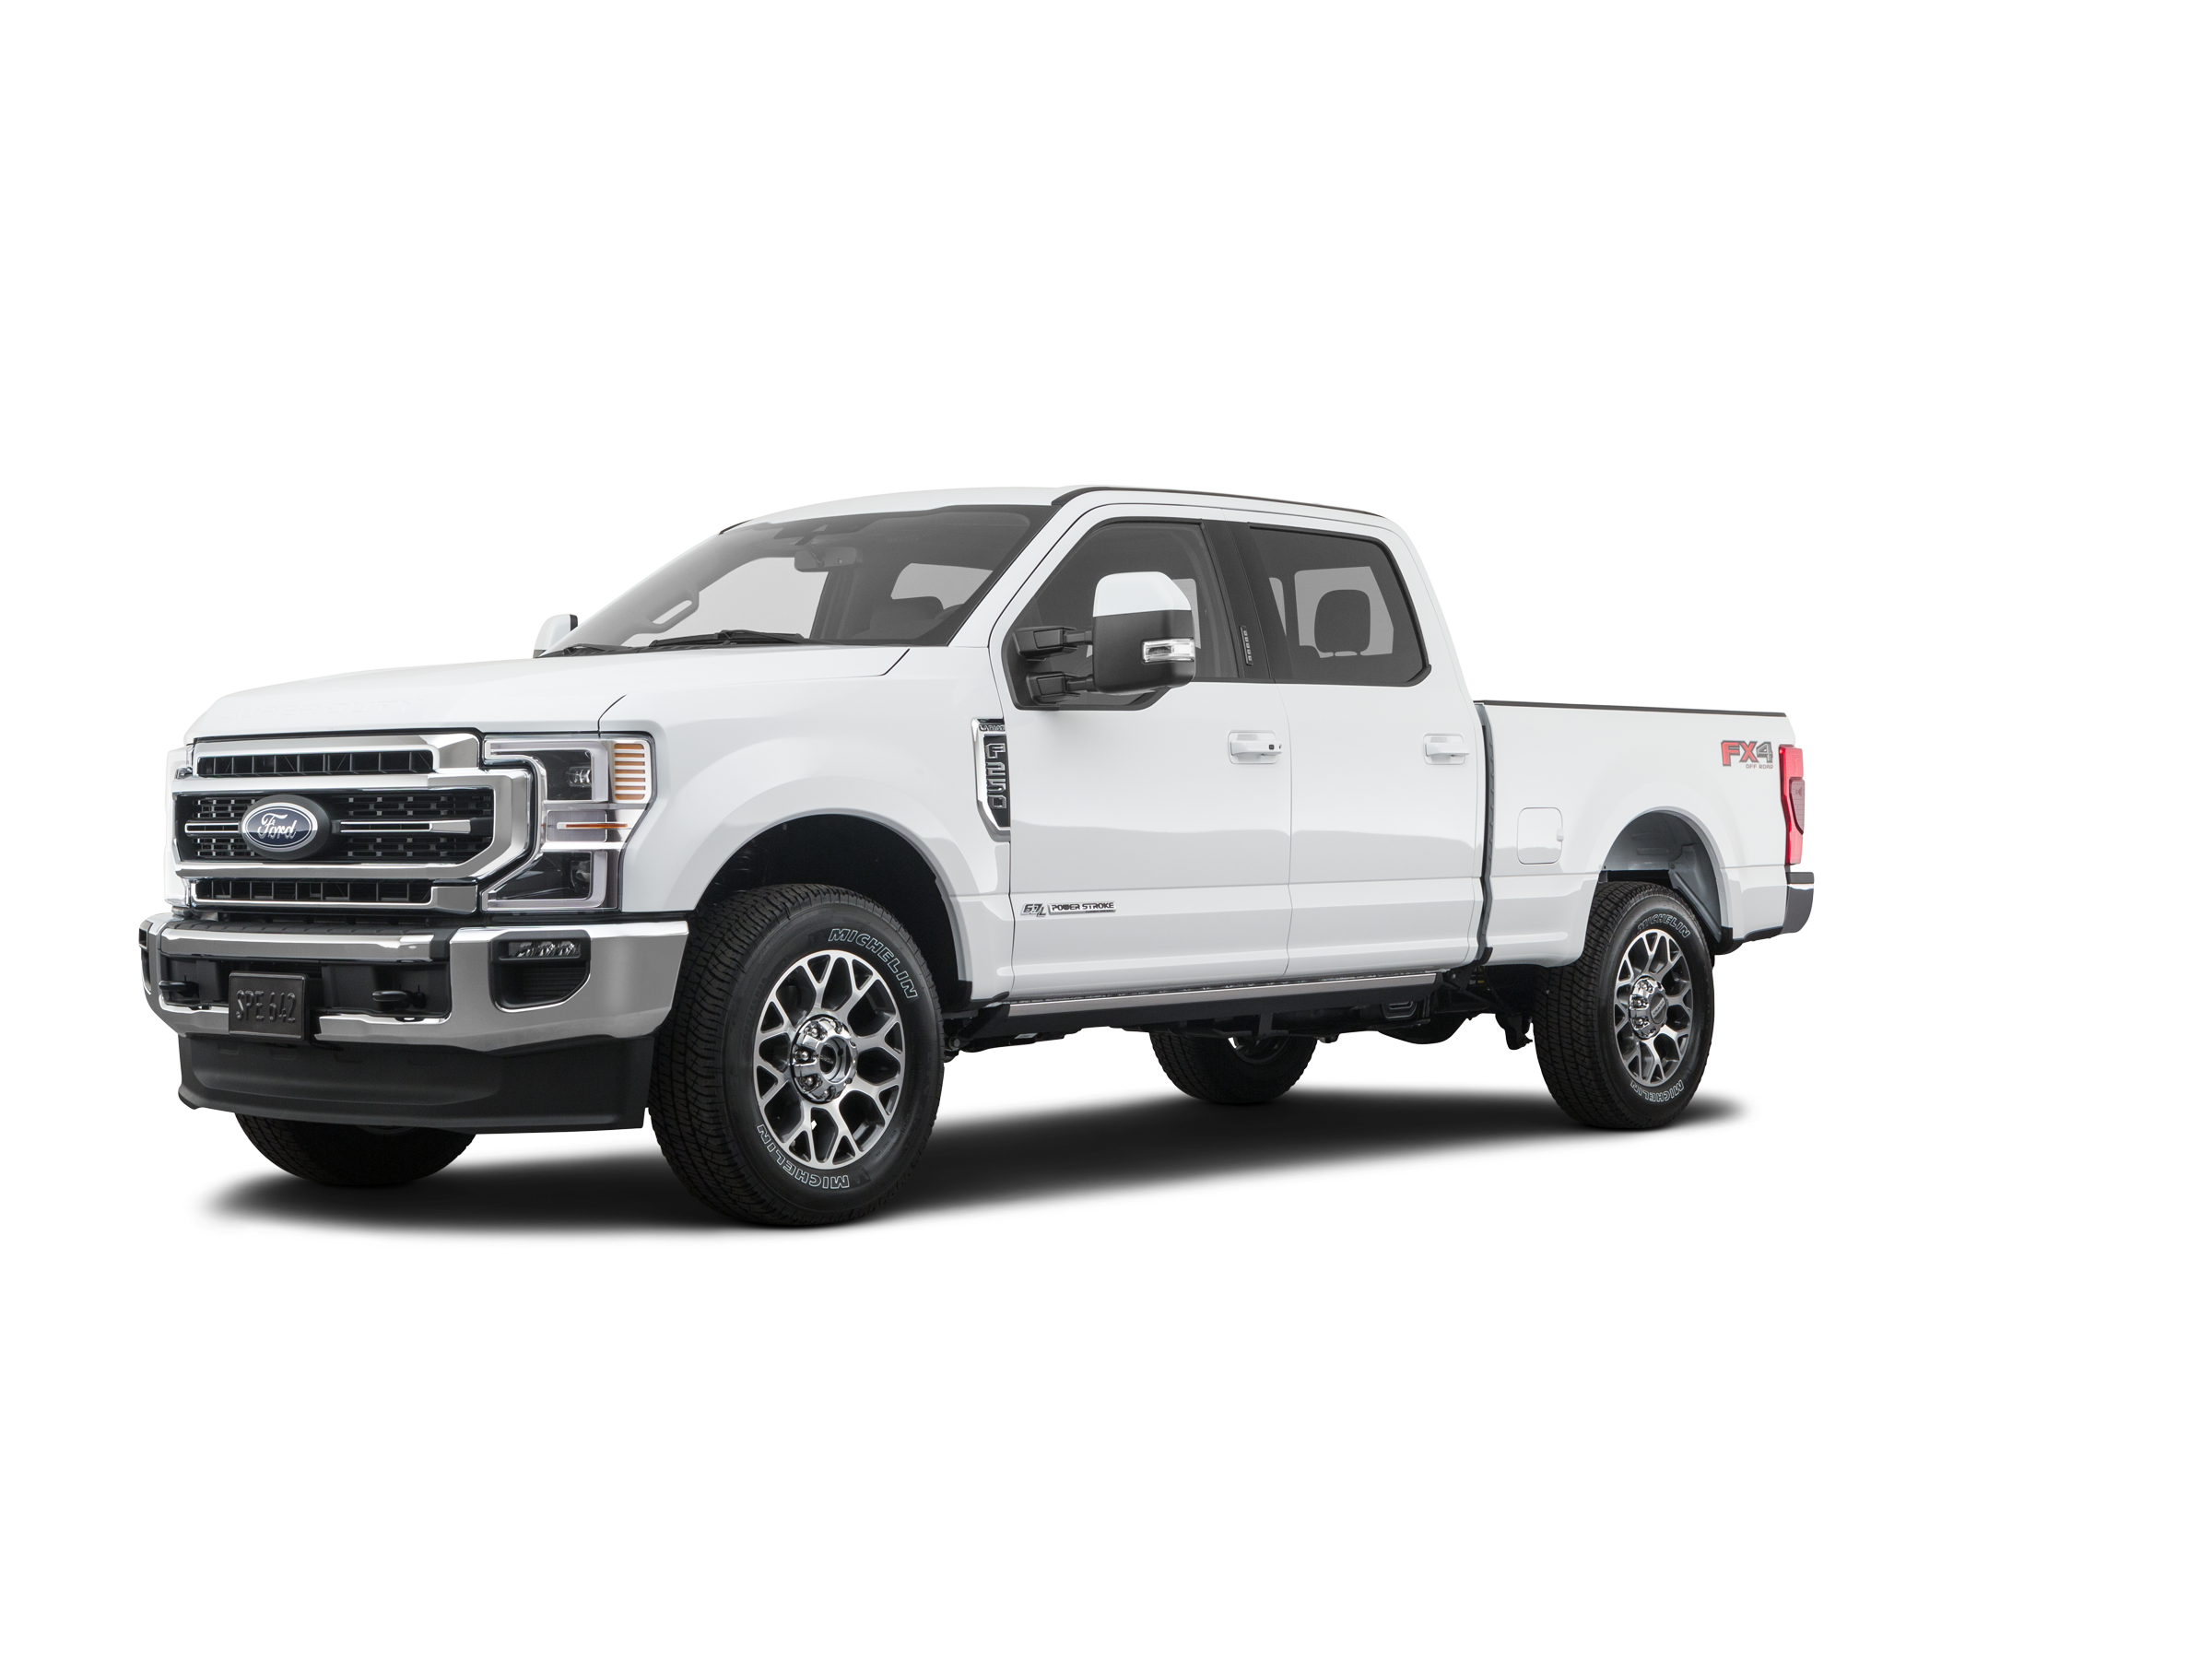 2022 Ford F250 Reviews, Pricing & Specs | Kelley Blue Book